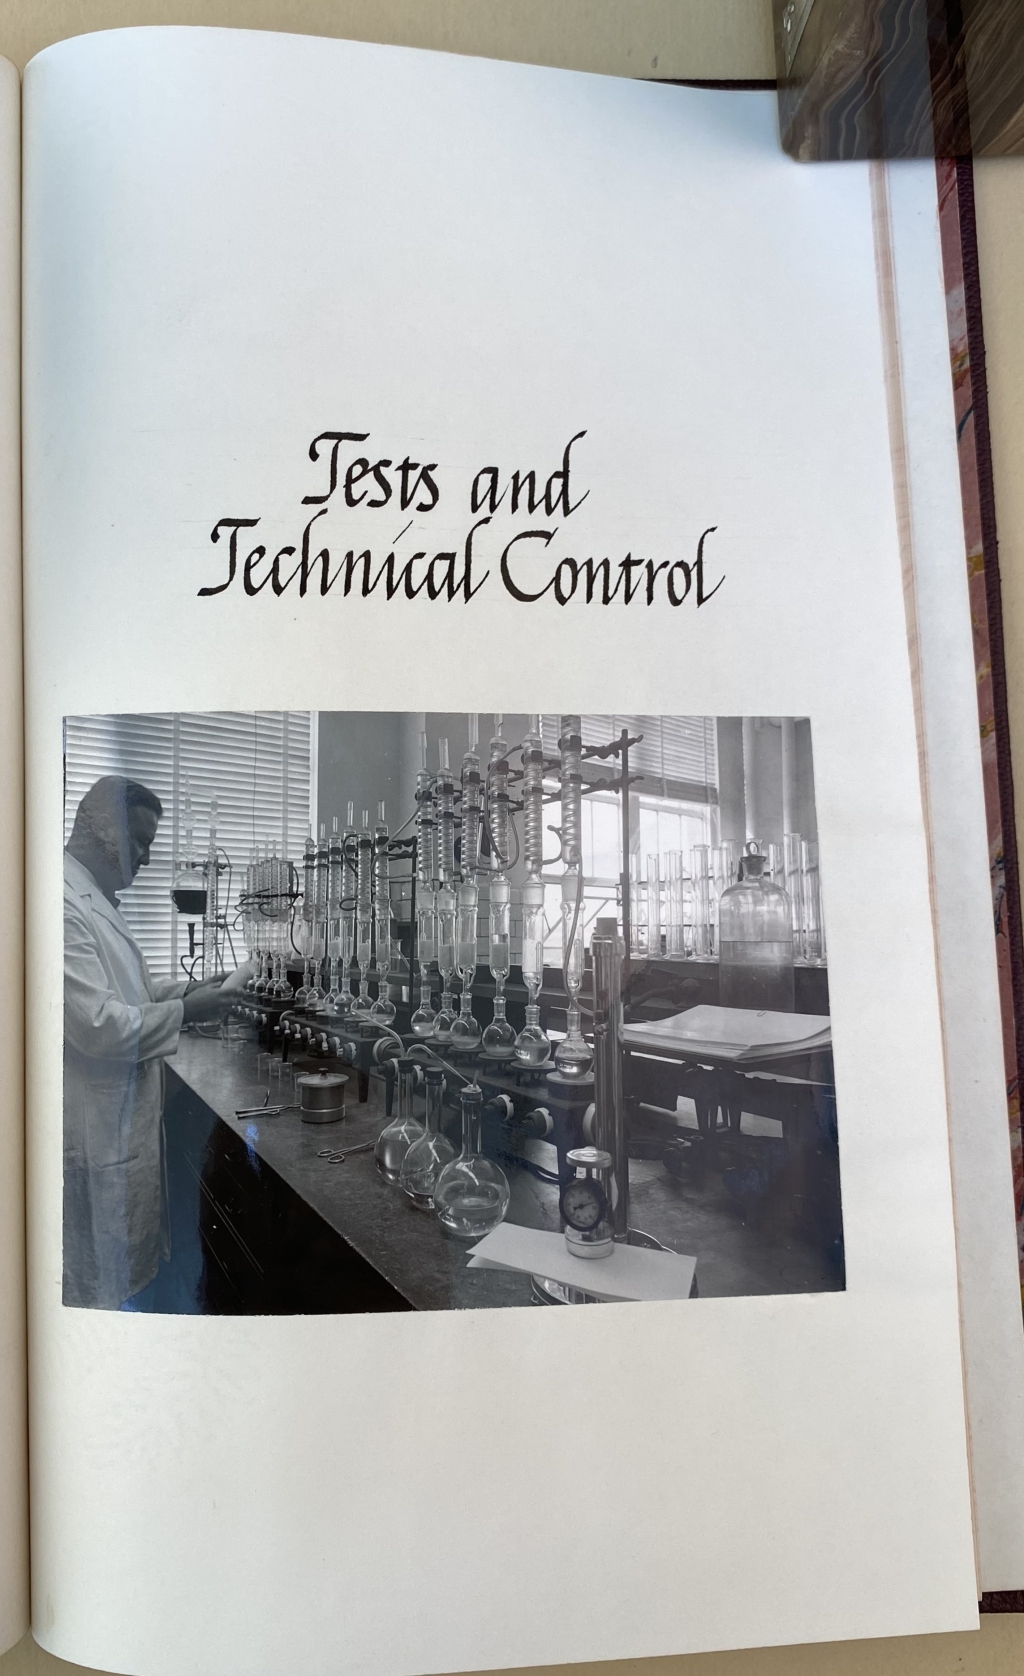 Tests and technical control at the GPO